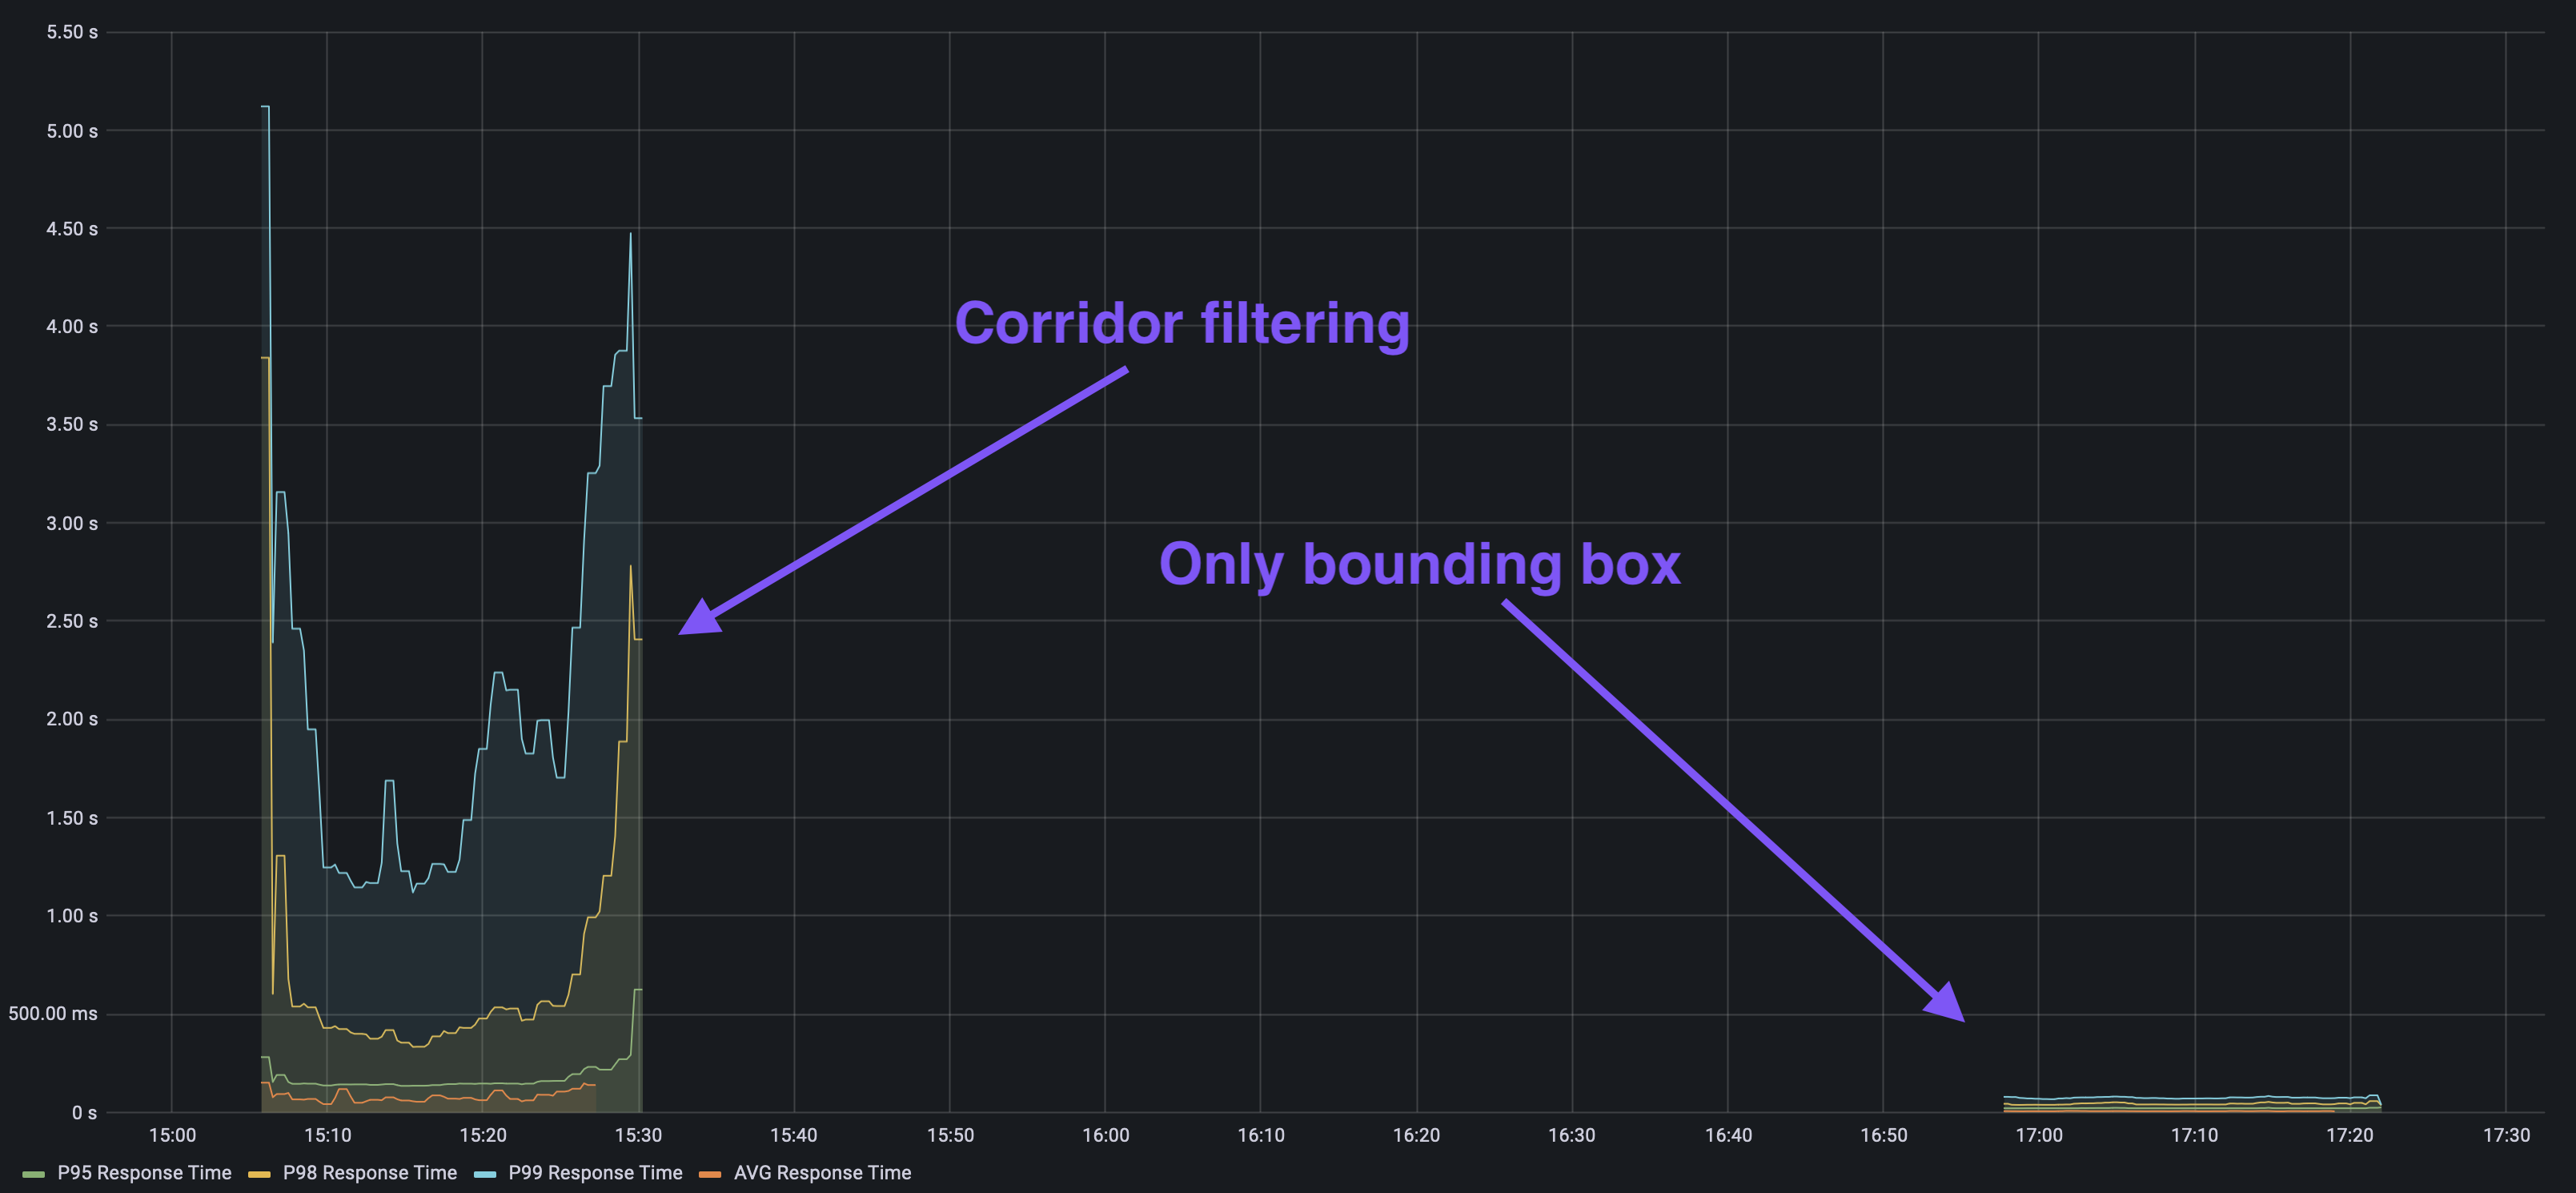 A time series graph showing average, p95, p98, and p99 response times. There are two separate sets of lines (executed at different times, with a gap in the middle), the ones on the left are labelled "Corridor filtering" adn the ones on the right are labelled "Only bounding box".